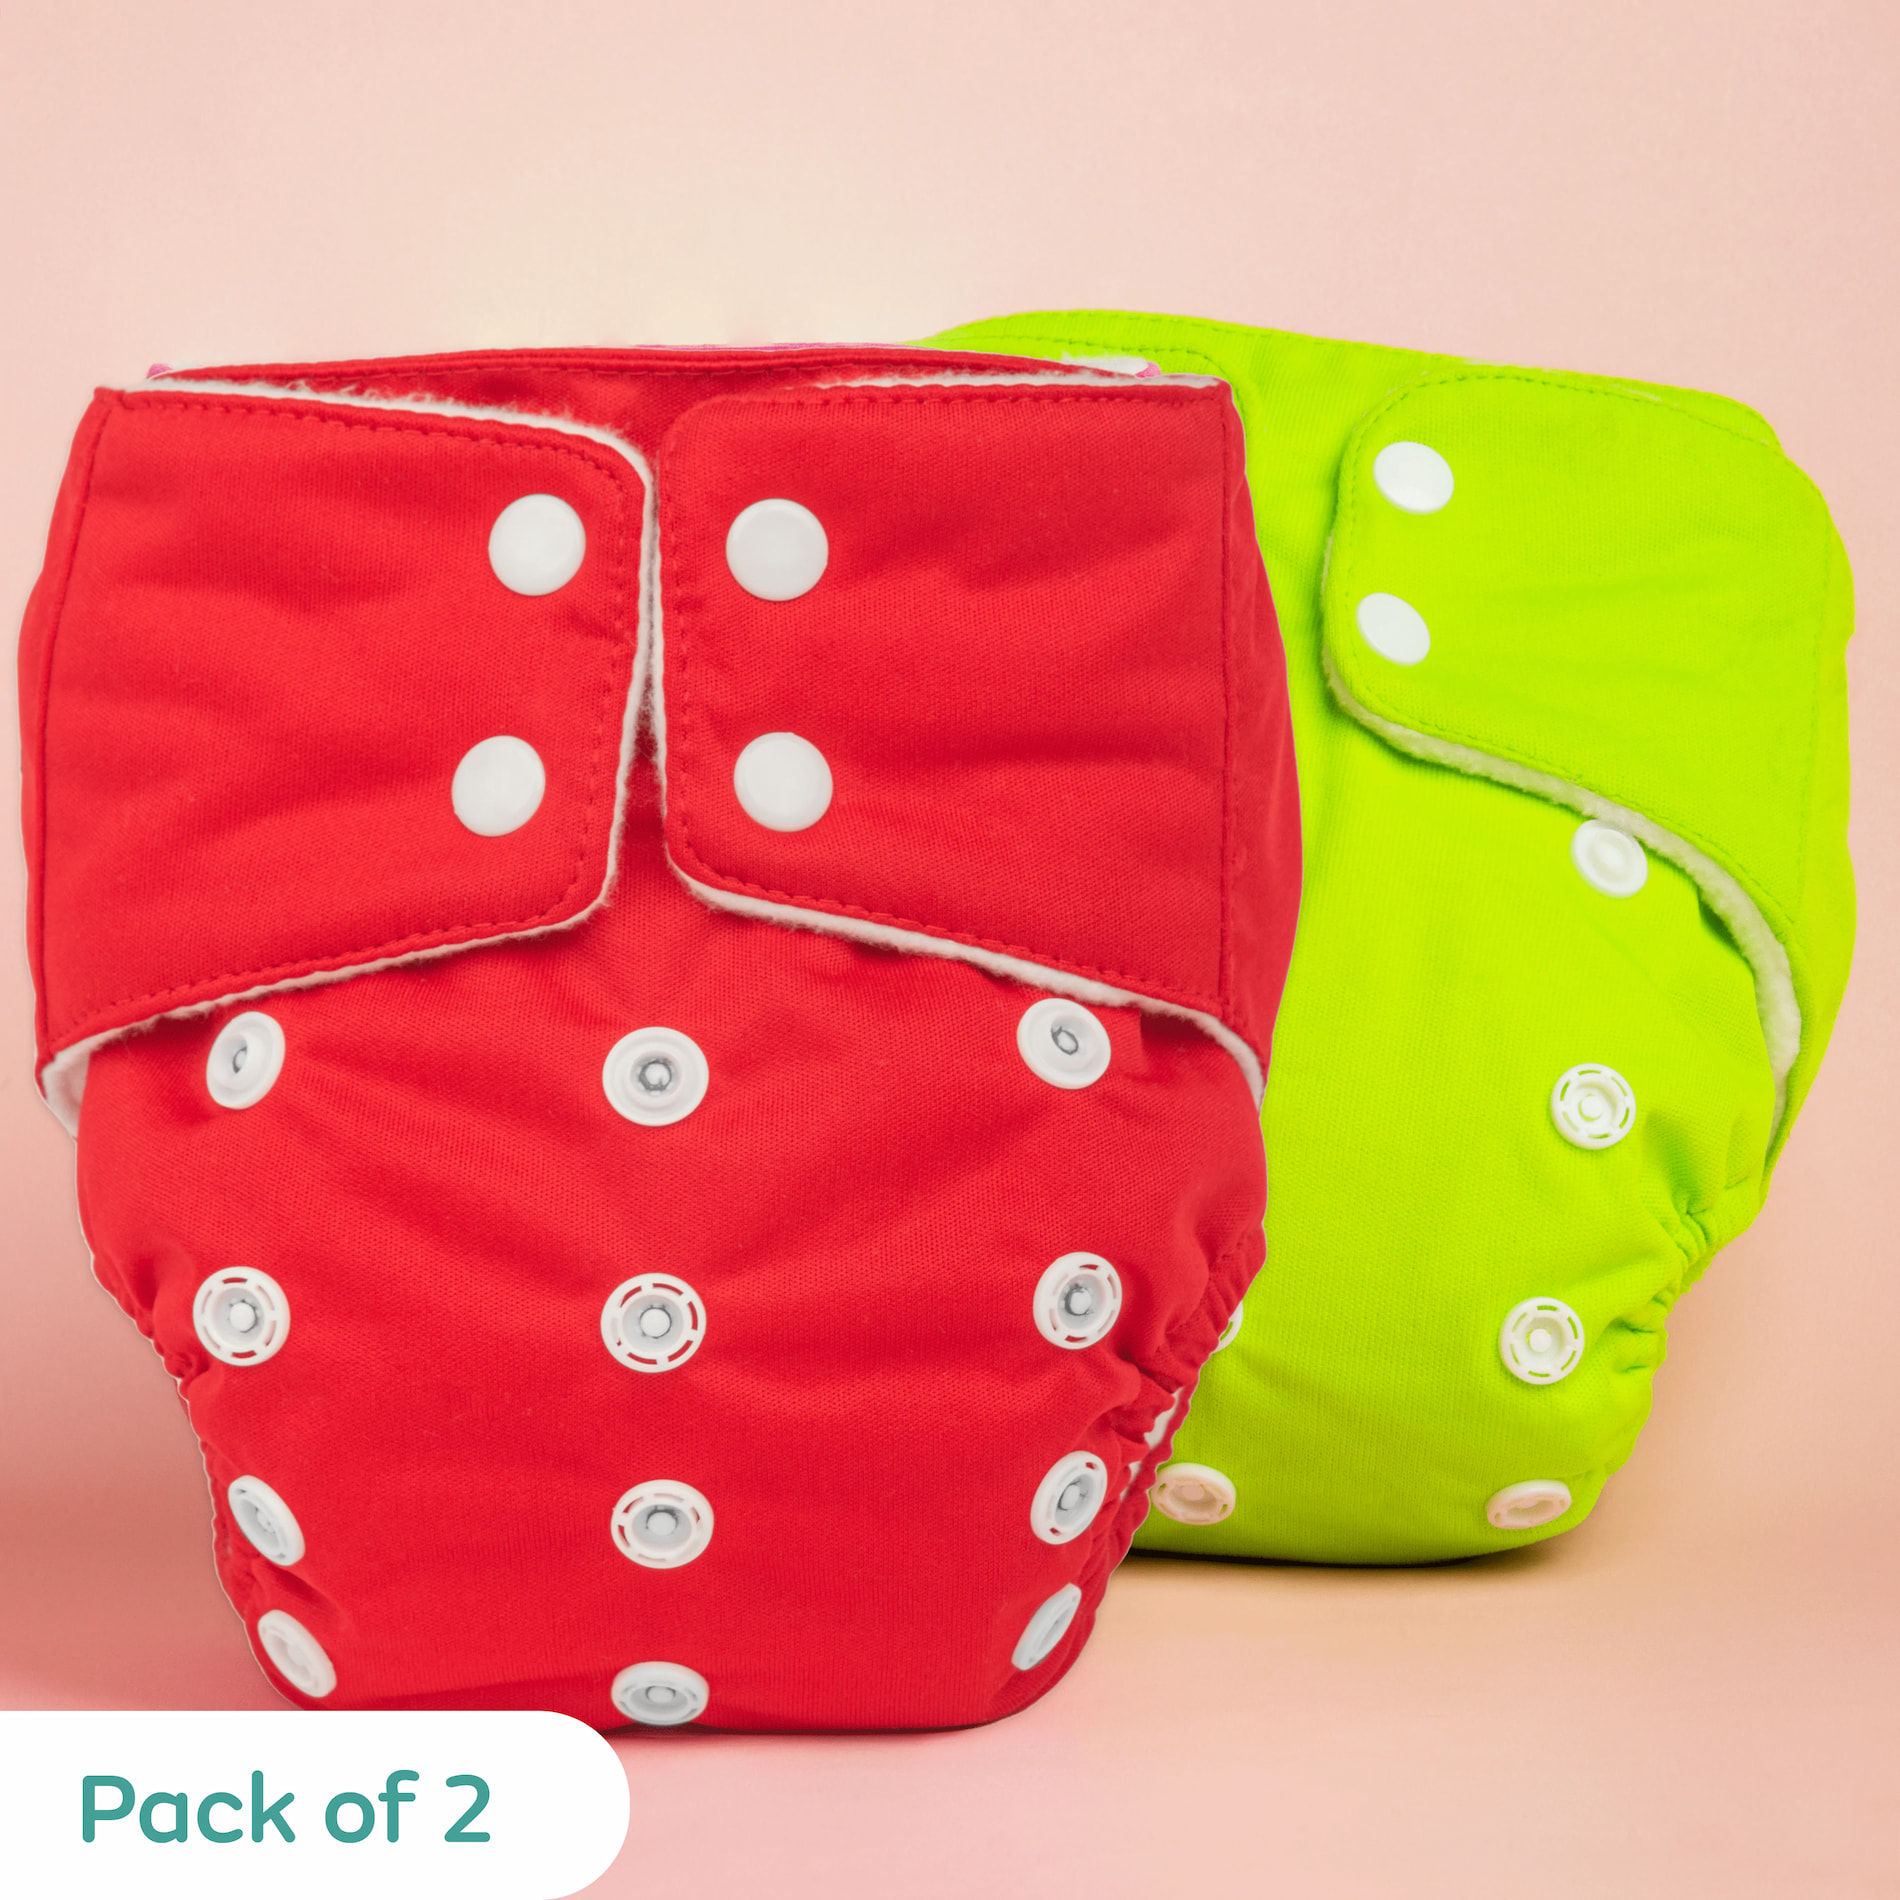 Adjustable & Reusable Cloth Diaper - Red & Green - Pack of 2